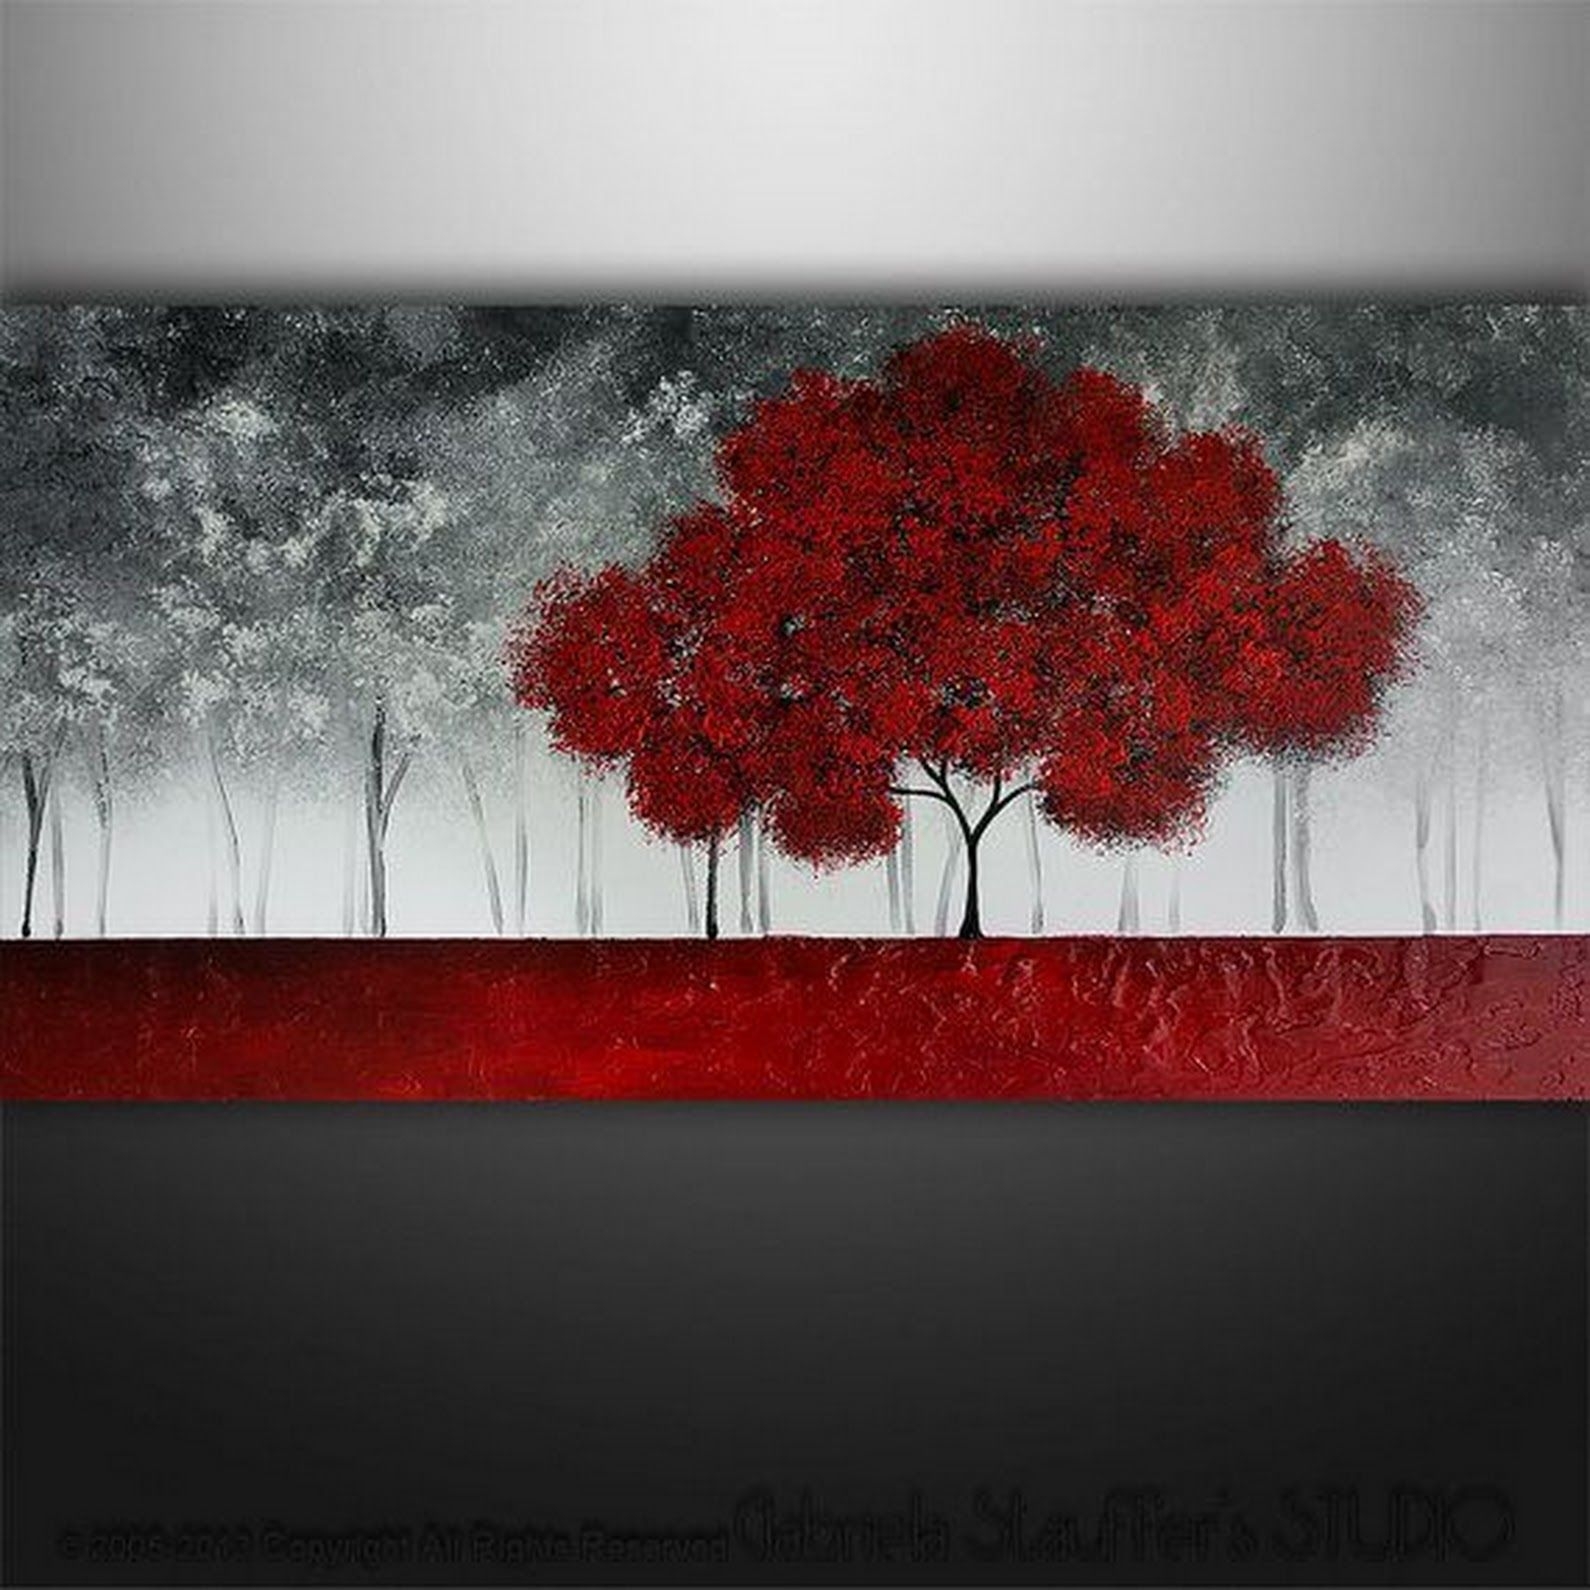 Metal Abstract Art Light Switch Plate Cover Sunset Trees Home Decor Tree Decor